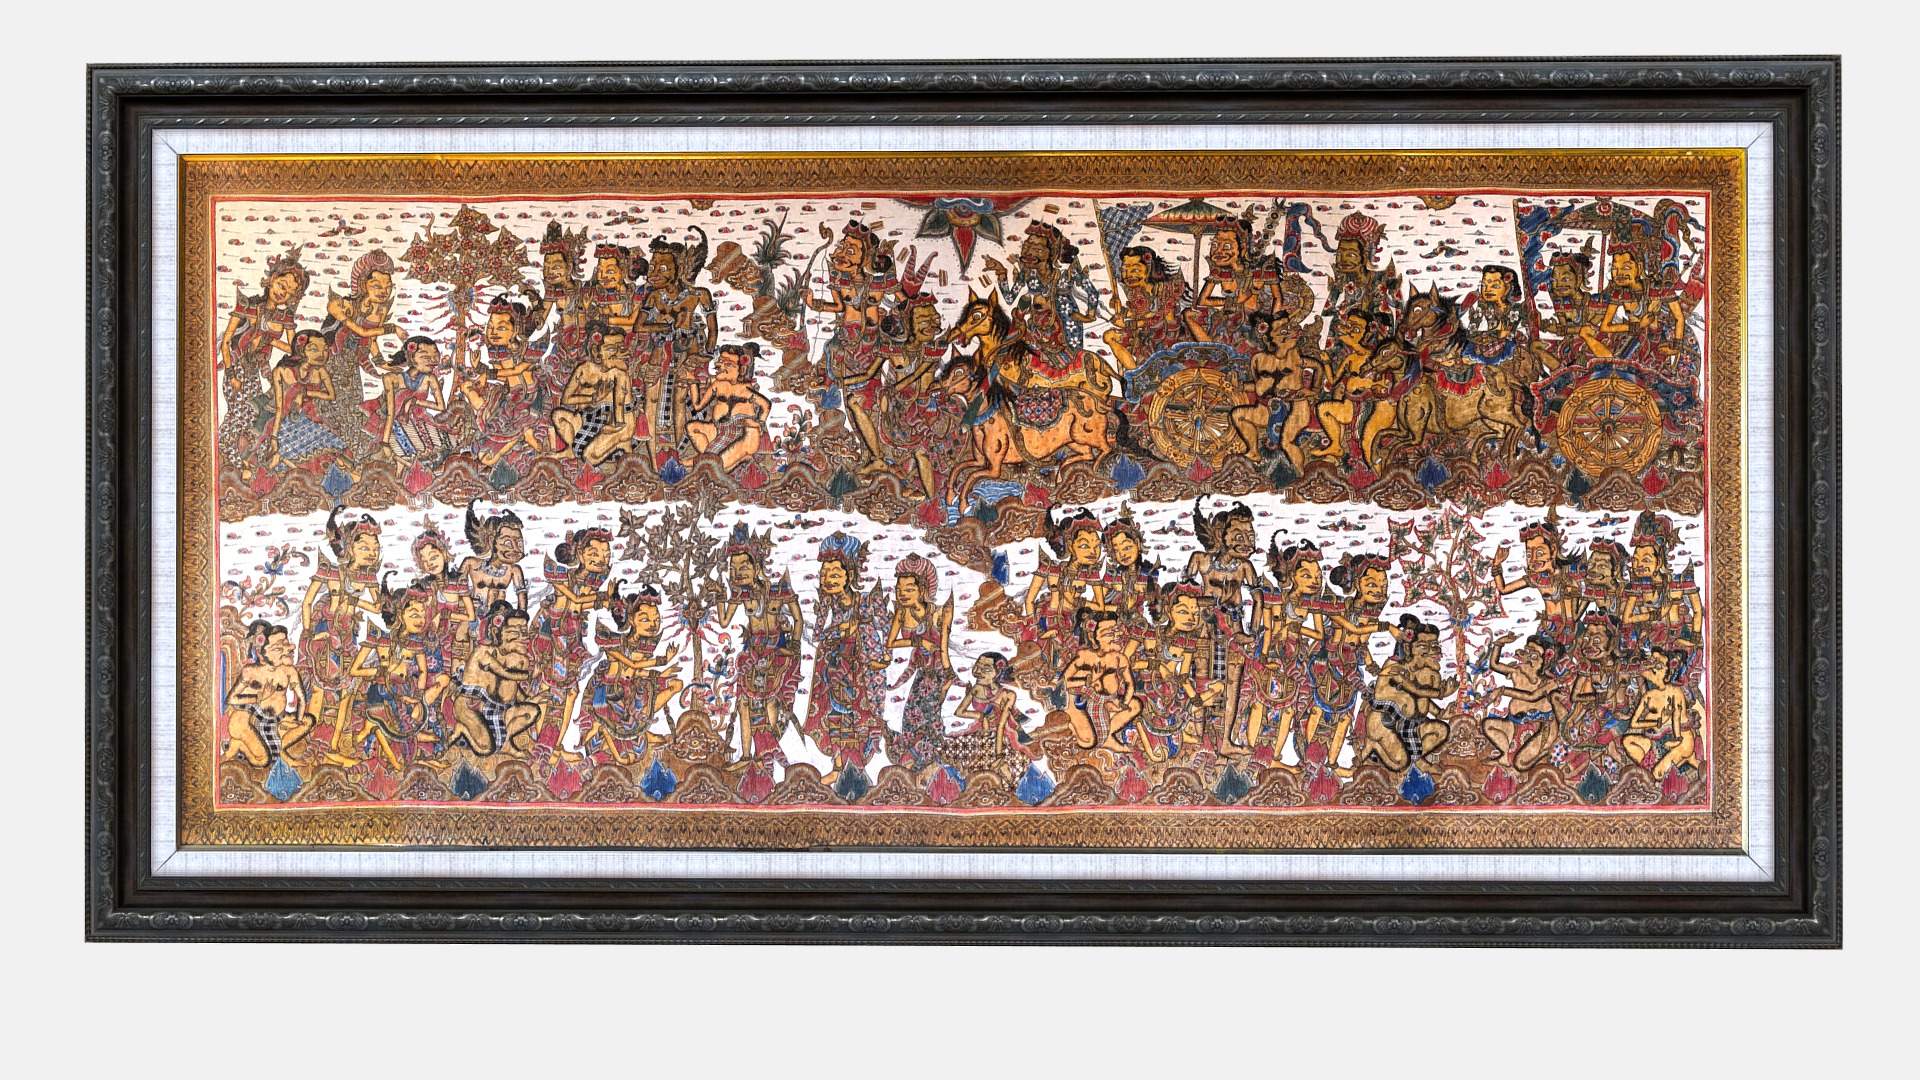 3D model Balinese picture black frame war slaughter - This is a 3D model of the Balinese picture black frame war slaughter. The 3D model is about a framed painting of a group of people.